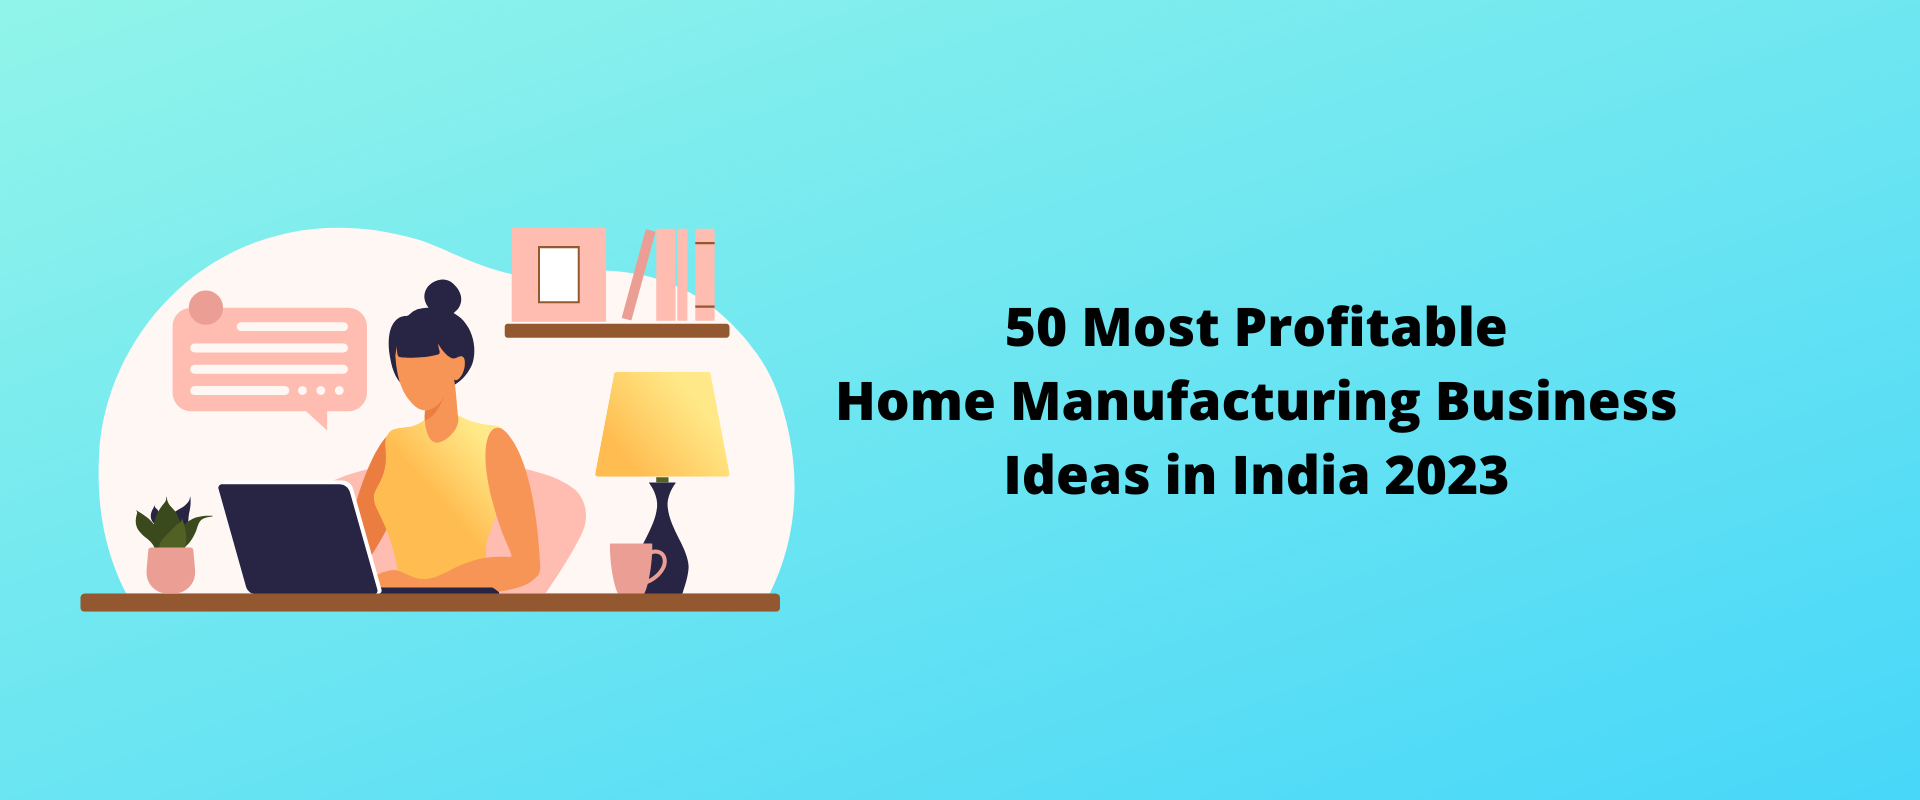 50 Most Profitable Home Manufacturing Business Ideas in India 2023